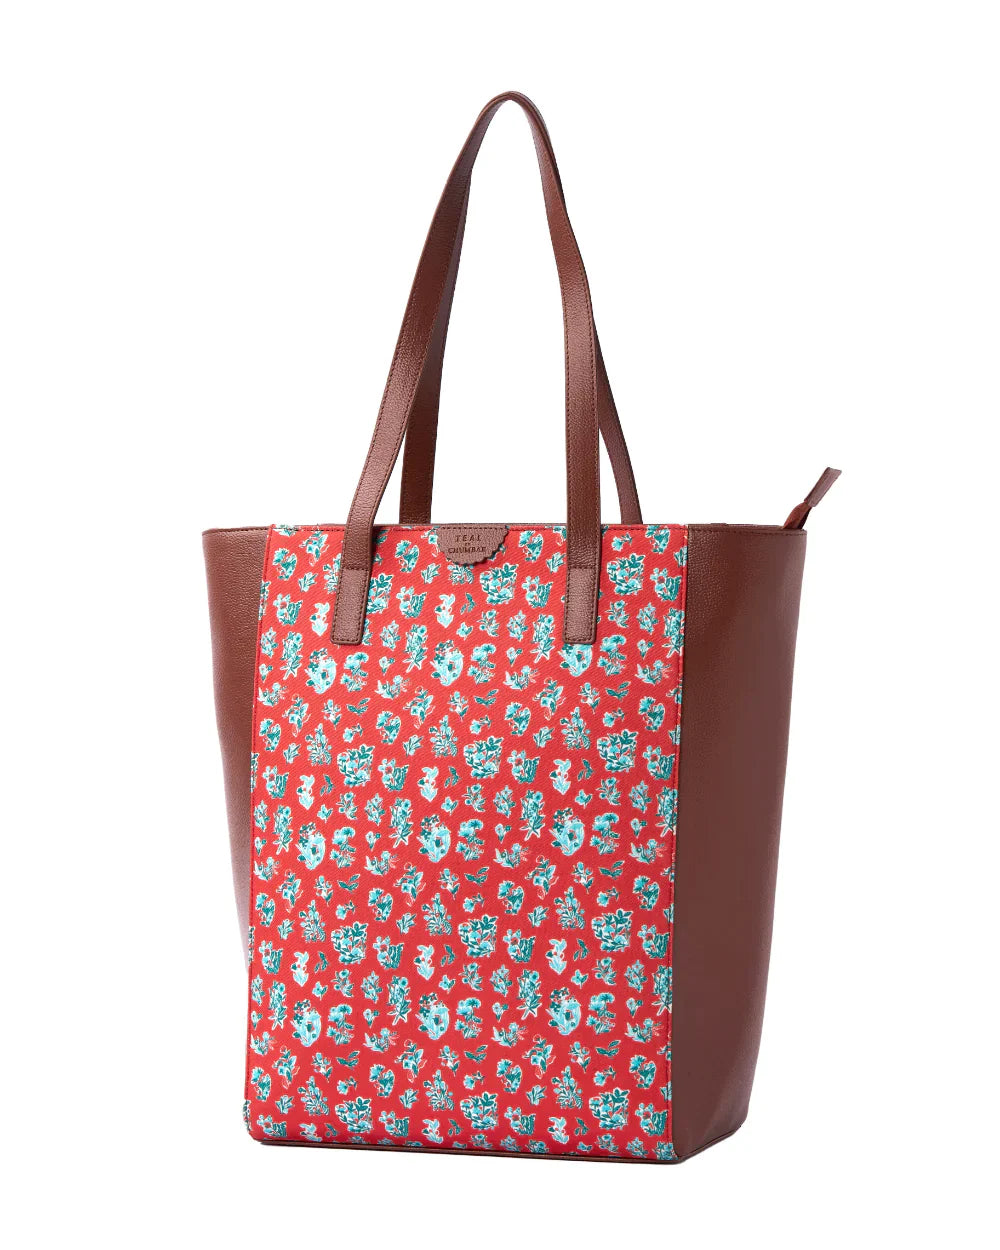 Teal By Wildflower Shopper Tote - Chumbak